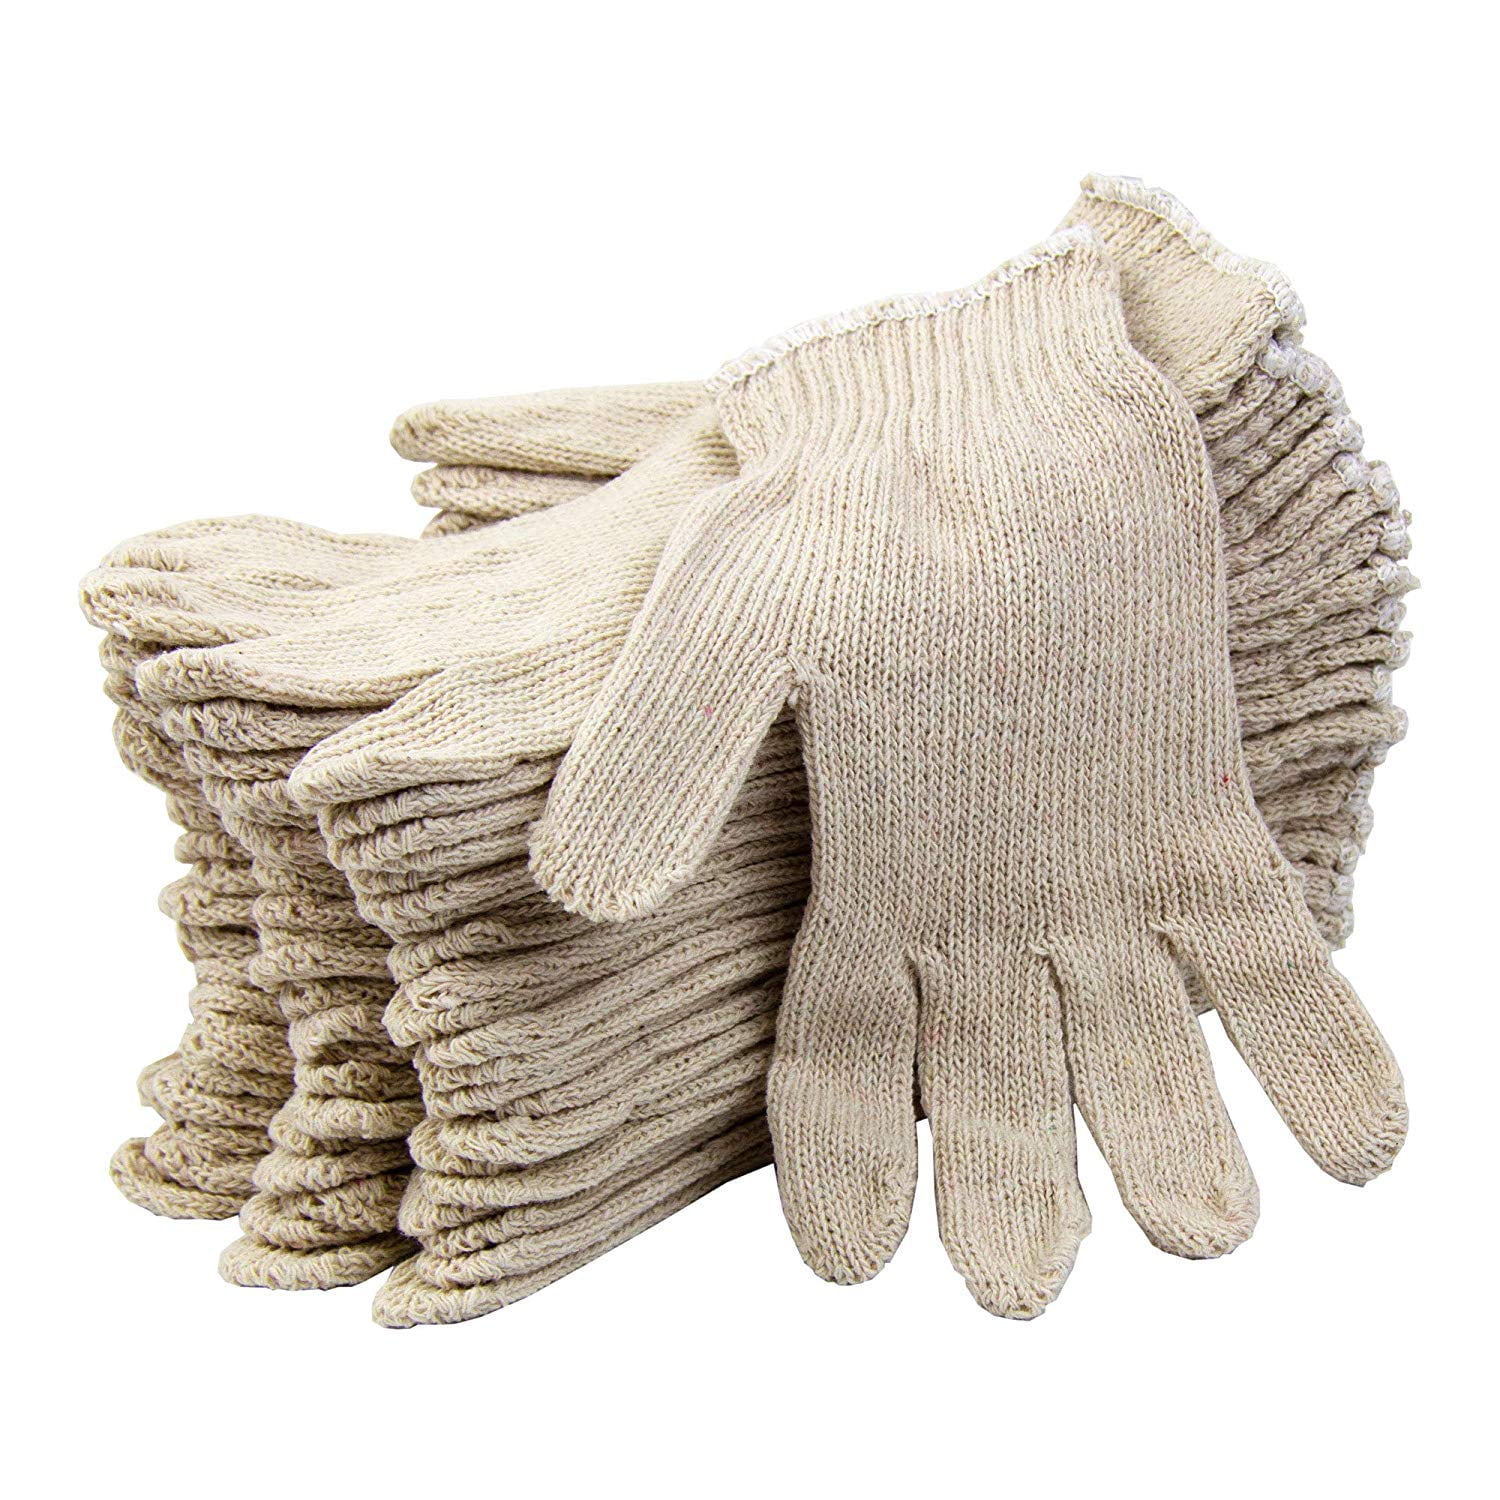 TC Knitting Gloves for Painter Mechanic Industrial Warehouse Construction  Worker